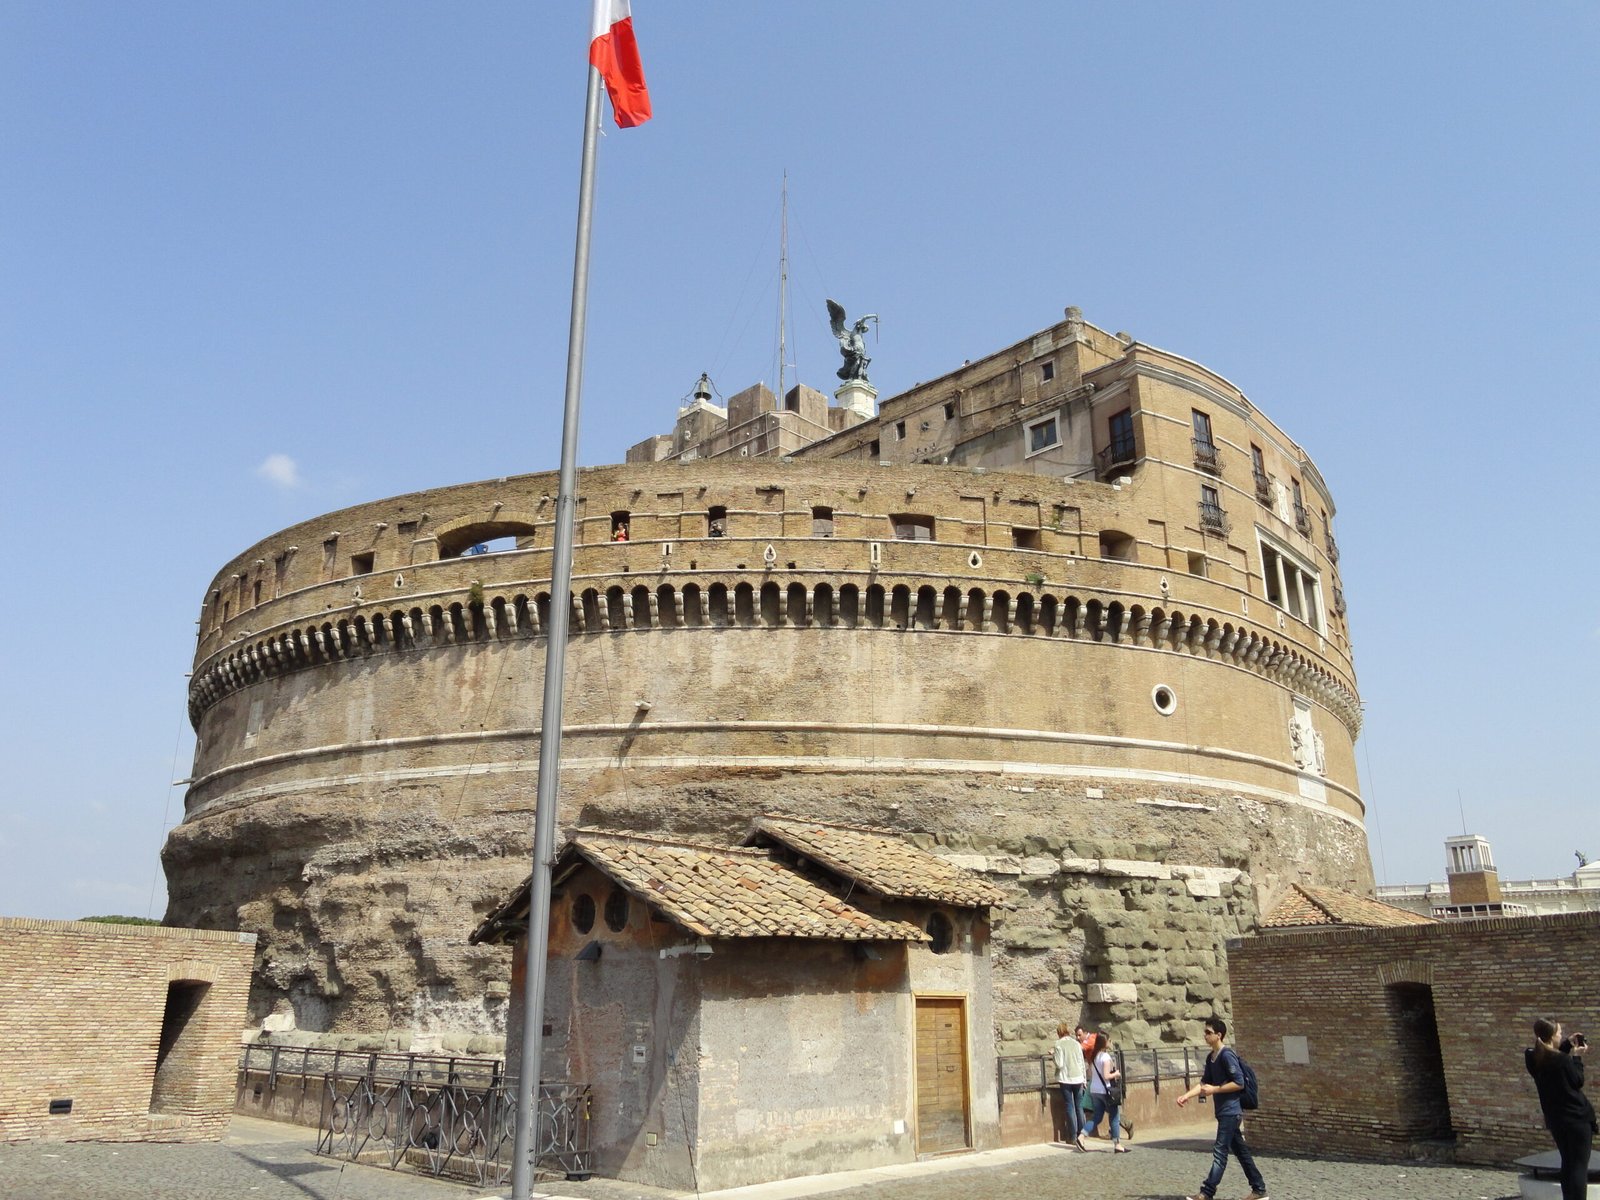 Castel Sant' Angelo in Rome, Italy is one of our 17 amazing sites to check out when in Rome.